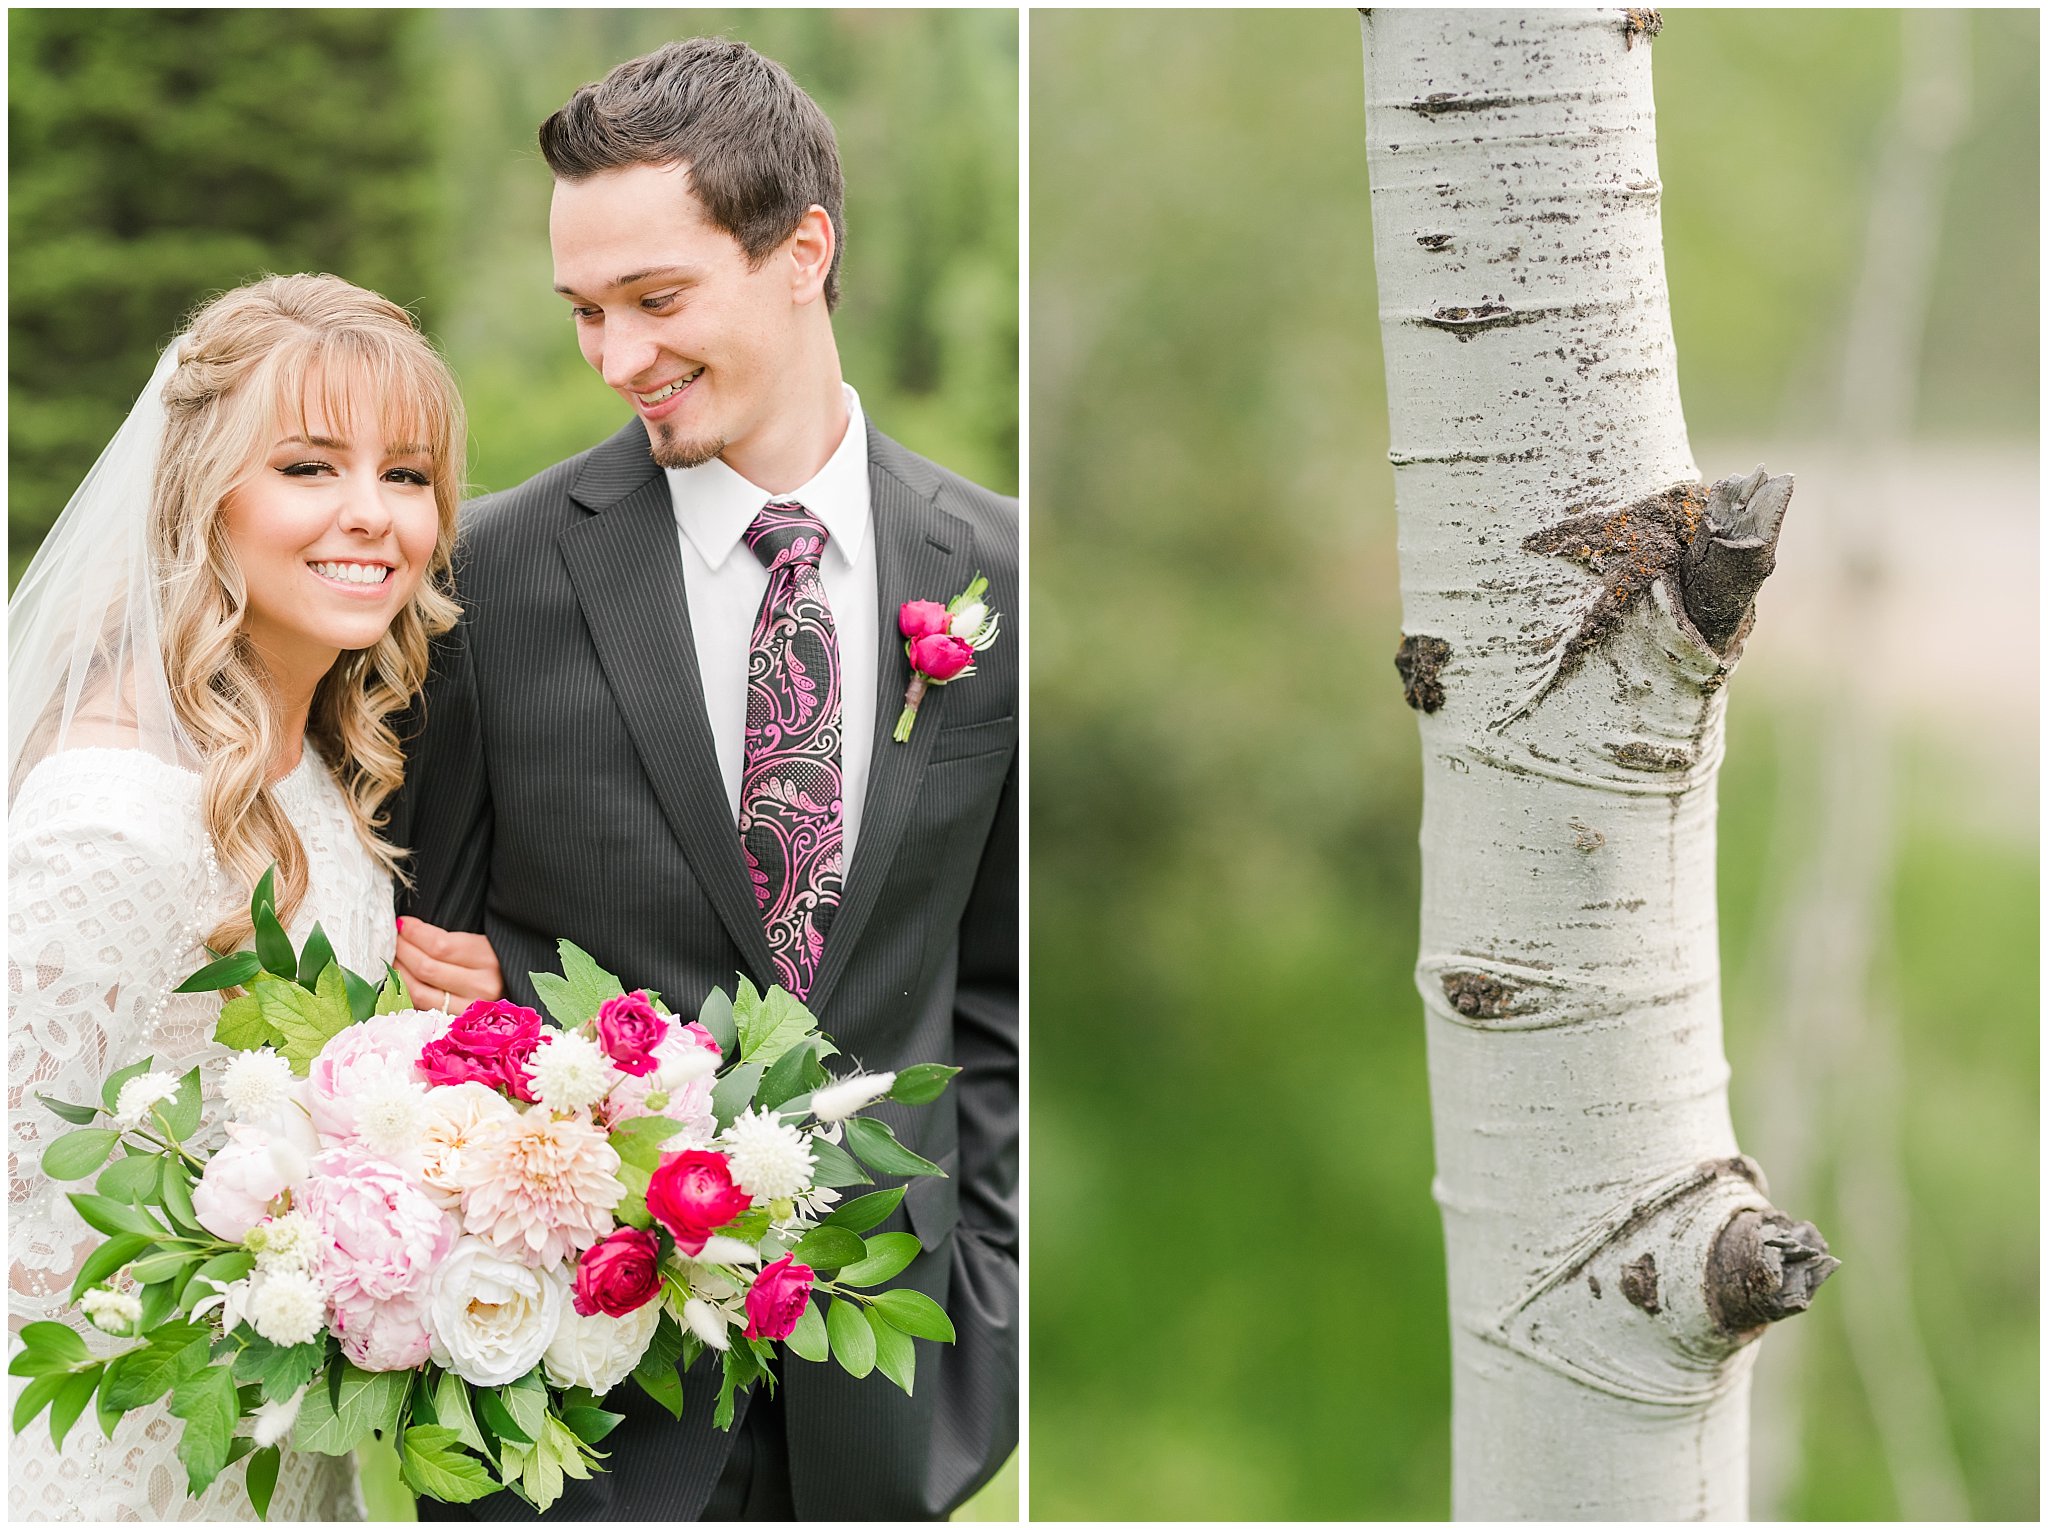 Candid photos of bride in lace dress and groom in black suit with deep pink and white floral bouquet | Utah Mountain Wedding Formal Session | Tibble Fork Summer Formal Session | Jessie and Dallin Photography